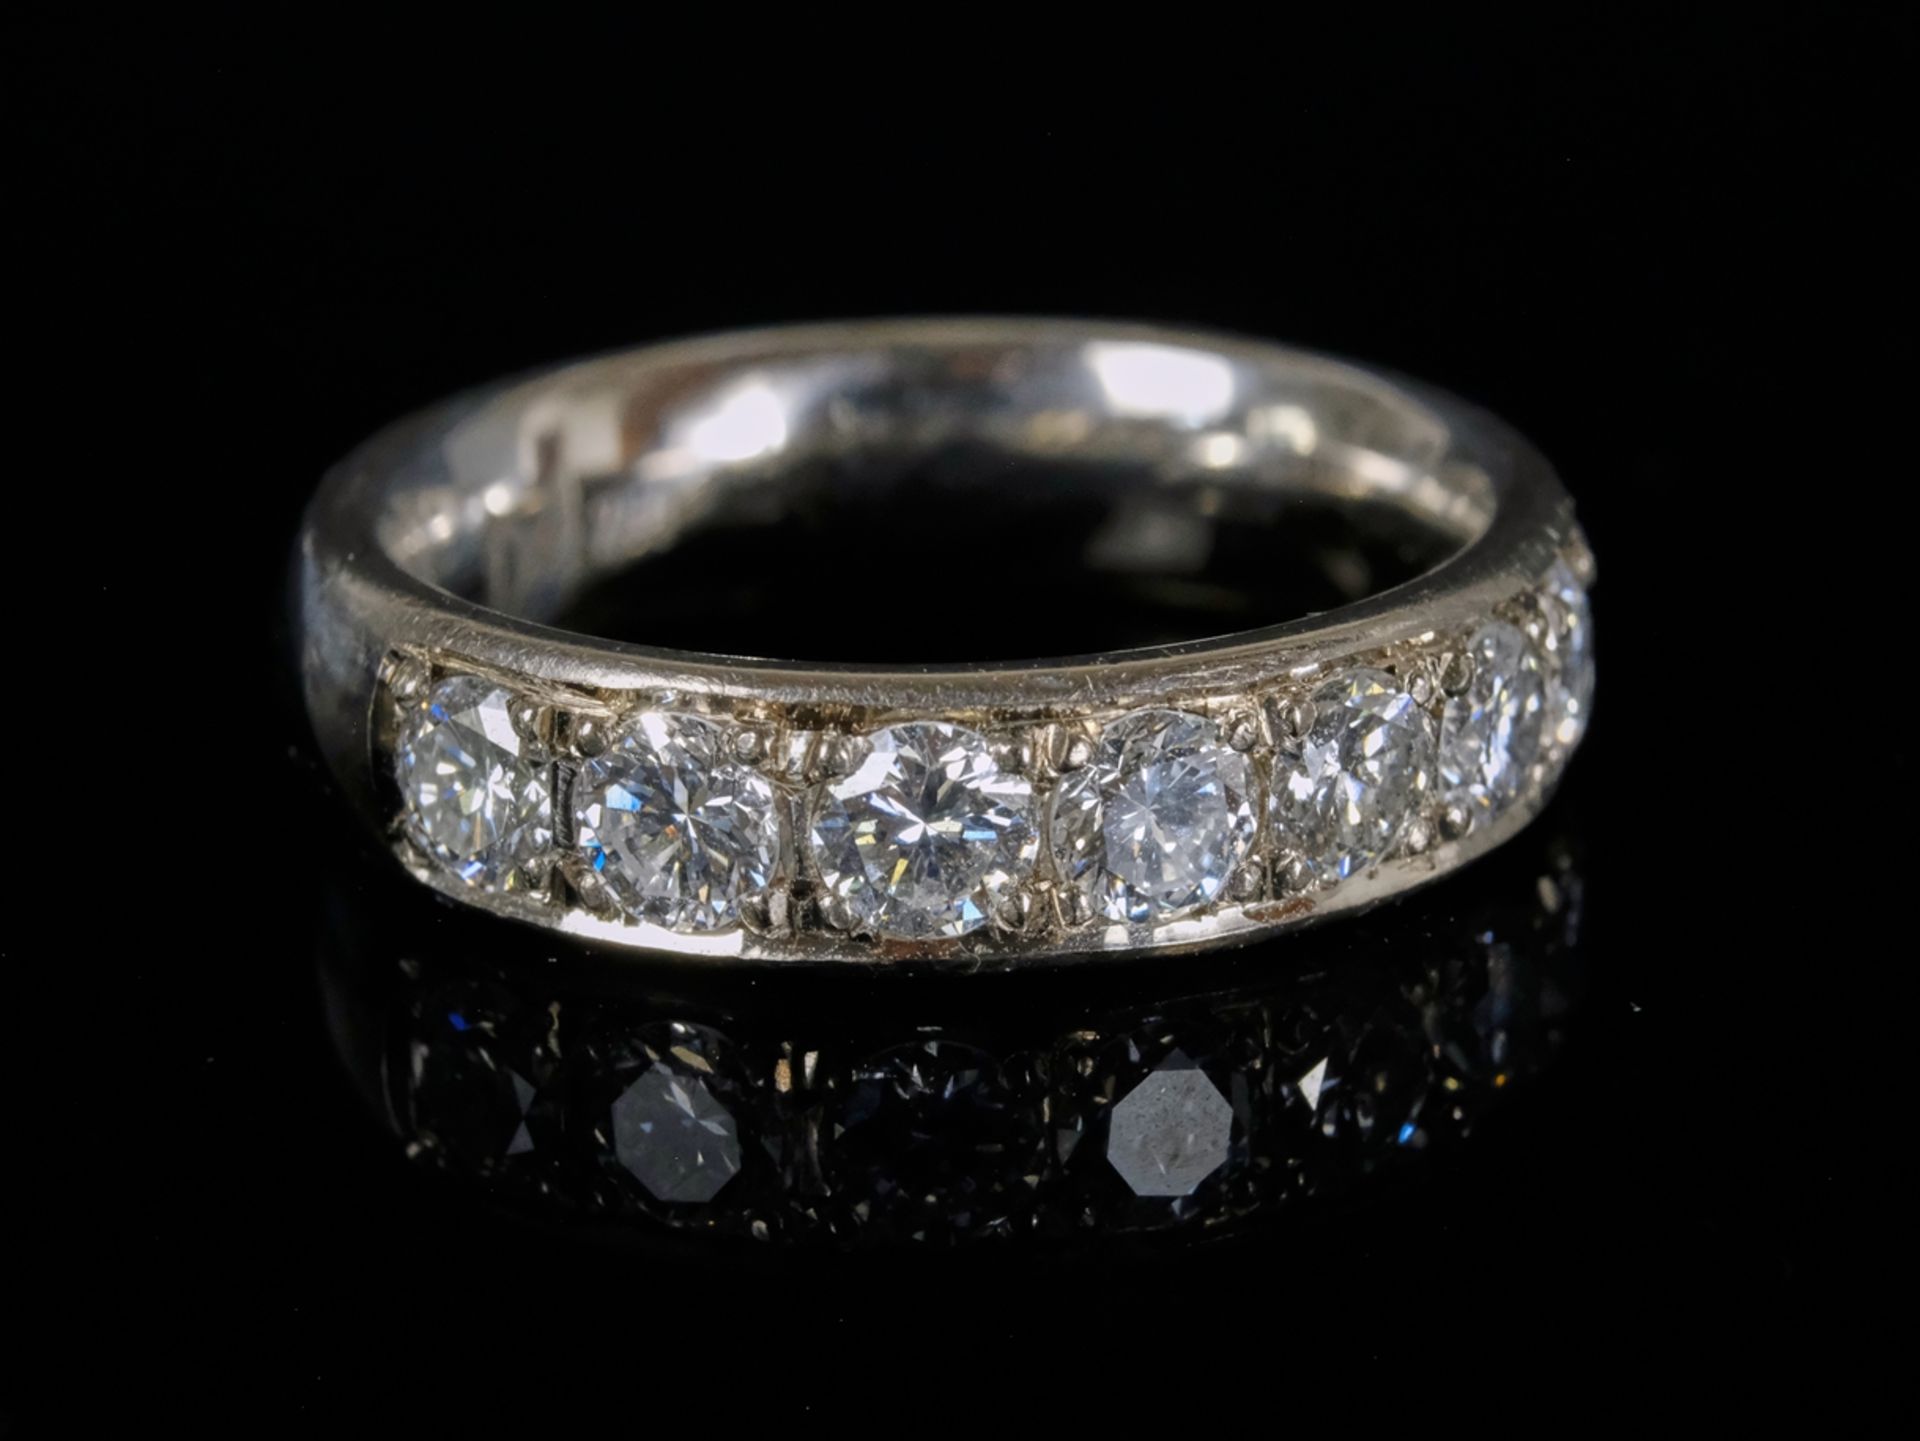 BRILLANT MEMORY RING set with eight brilliant-cut diamonds in a studded setting, MEISTER Manufaktur - Image 2 of 4